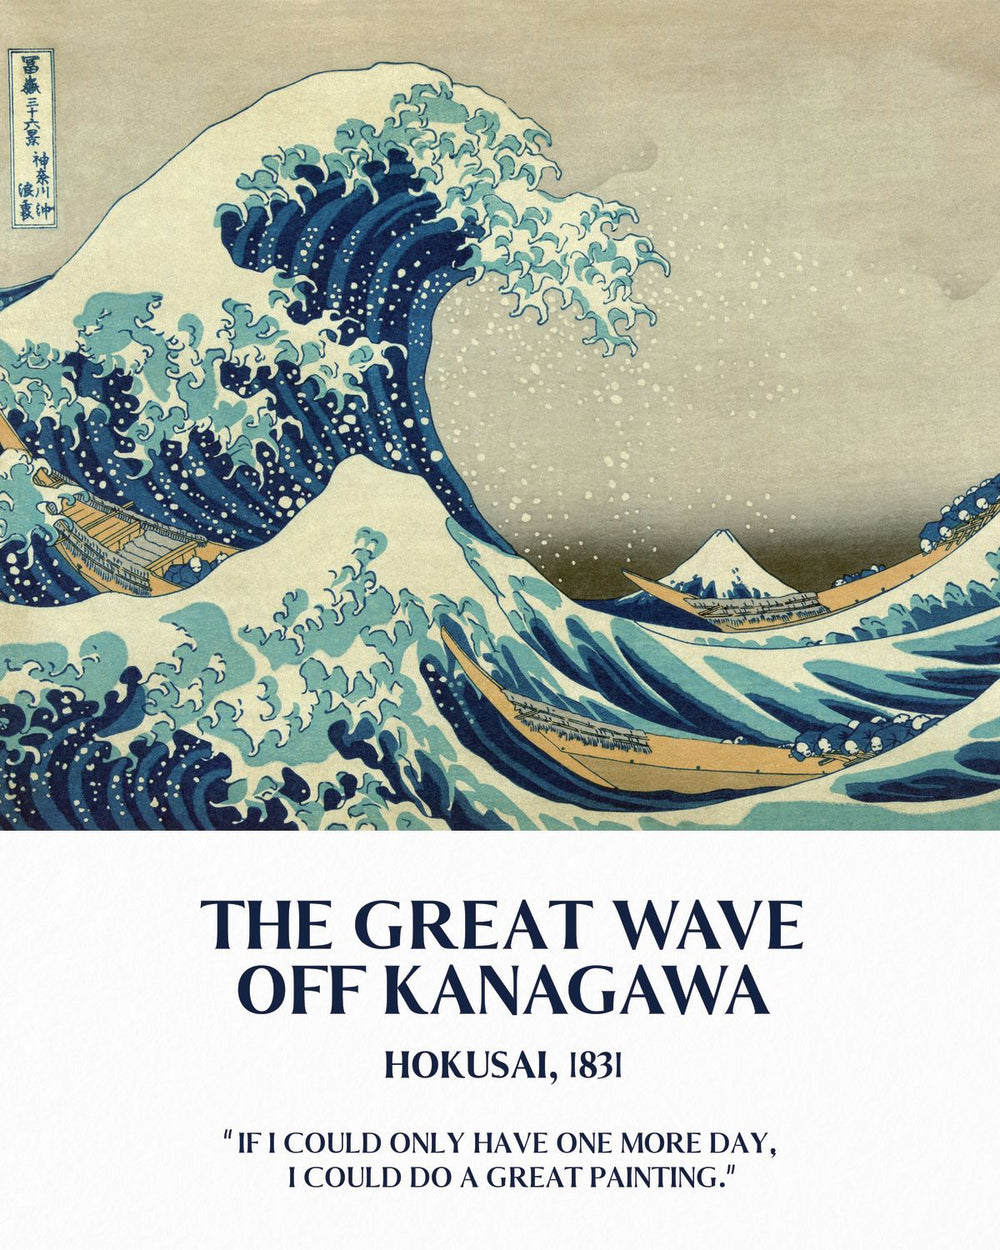 Great Wave Hokusai Exhibition Poster